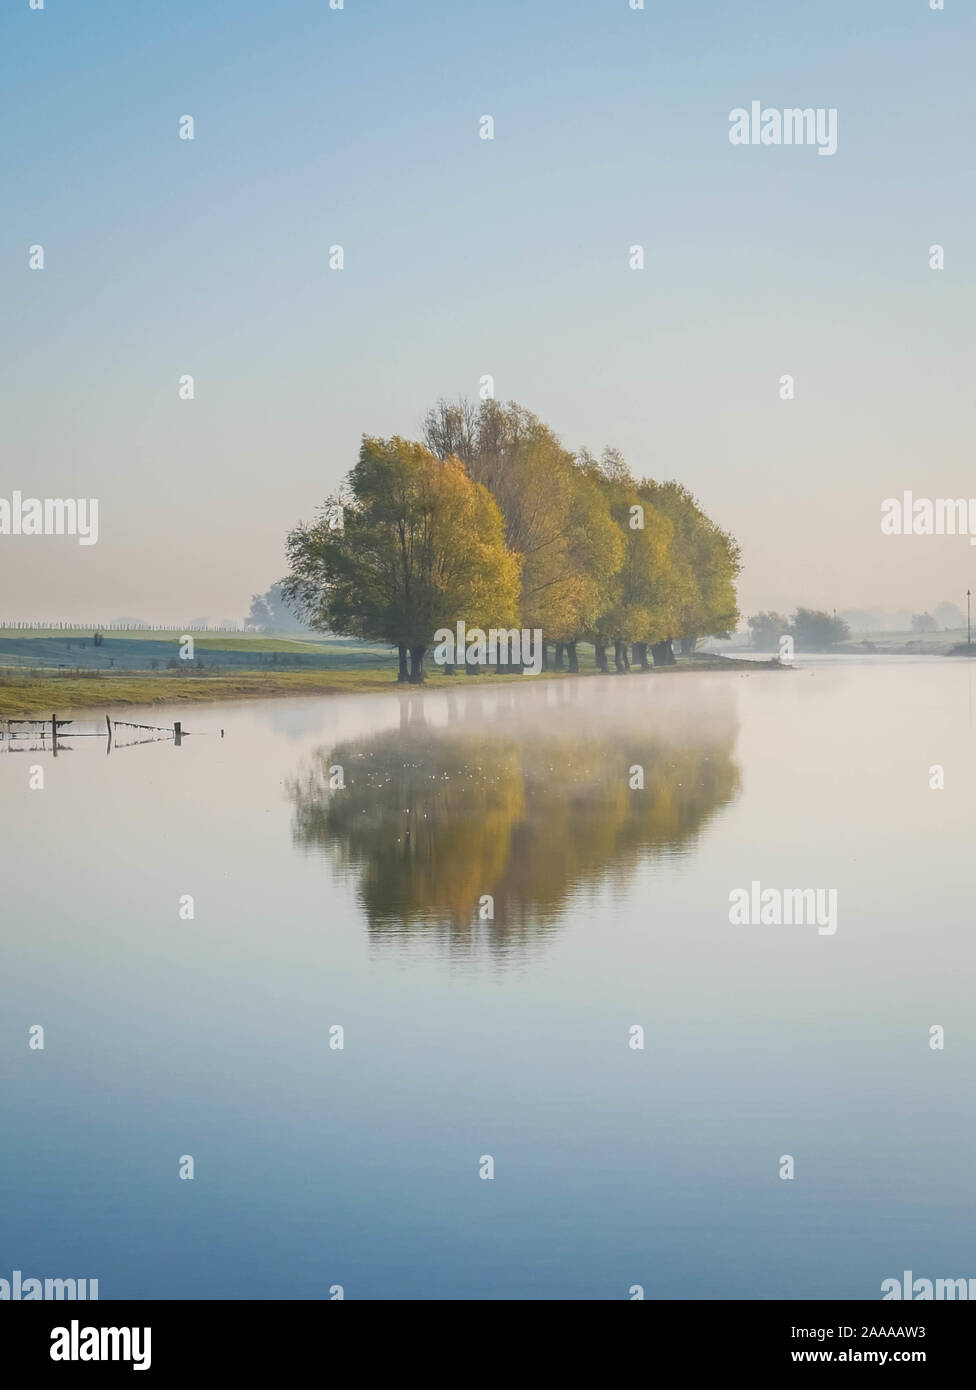 Group of colorful trees with reflection on mirror-like water Stock Photo